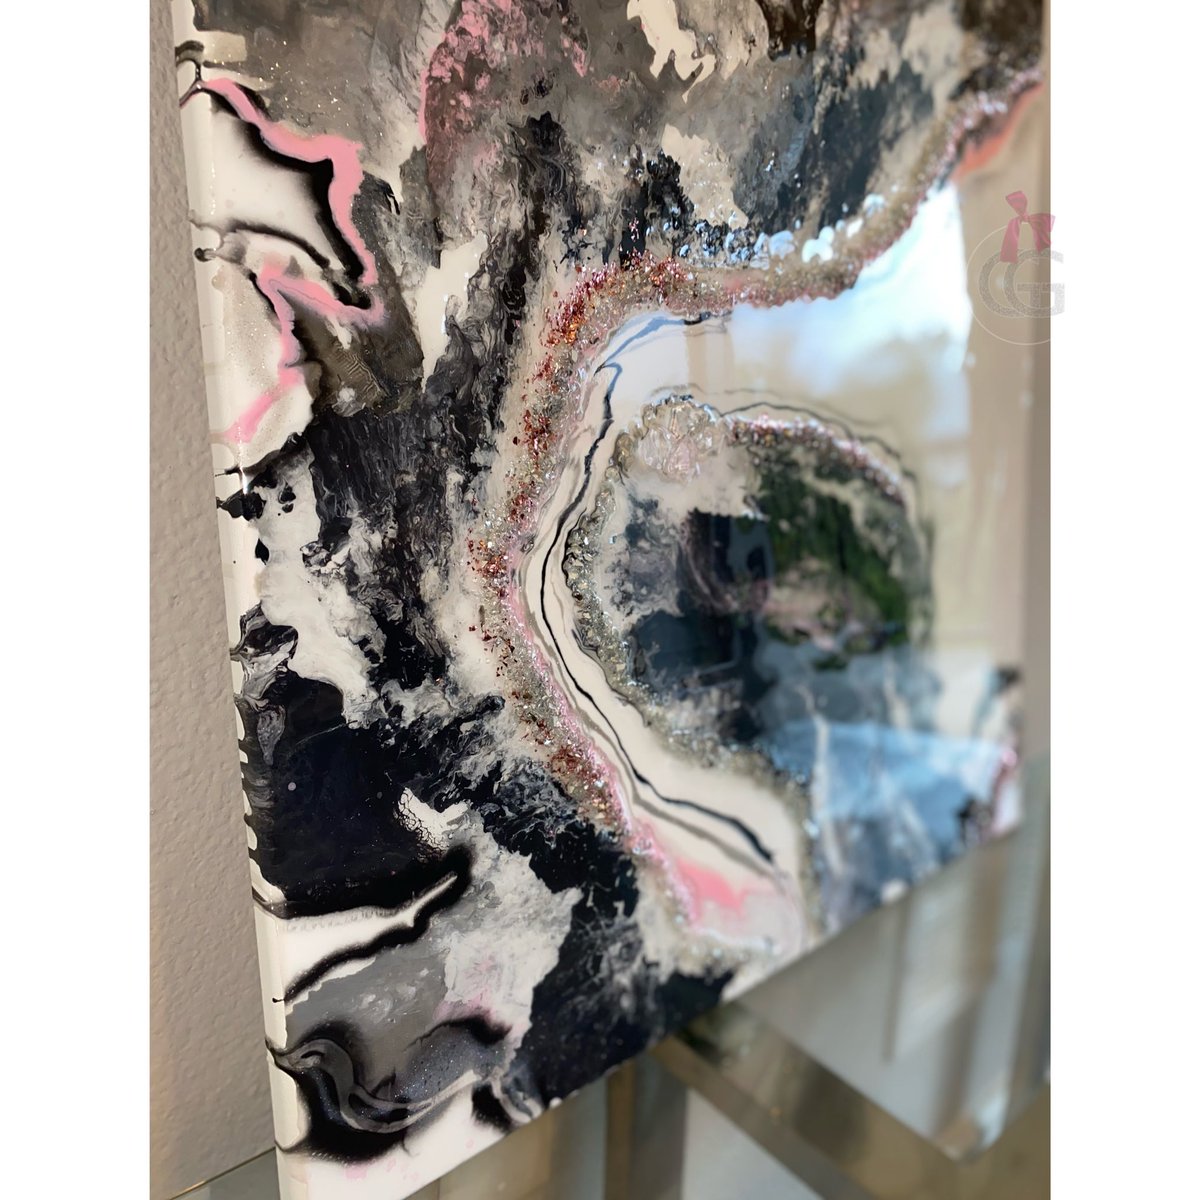 Let us add some 𝓼𝓱𝓲𝓷𝓮 to your home decor✨

DM for inquiries or visit our site for more info.

giftsofgabb.bigcartel.com/custom-orders

•

#fineart #crystalart #luxuryart #homedecor #3dartist #wallart #tallahassee #artforsale #interiordesign #fluidart #geodepainting #resinpainting